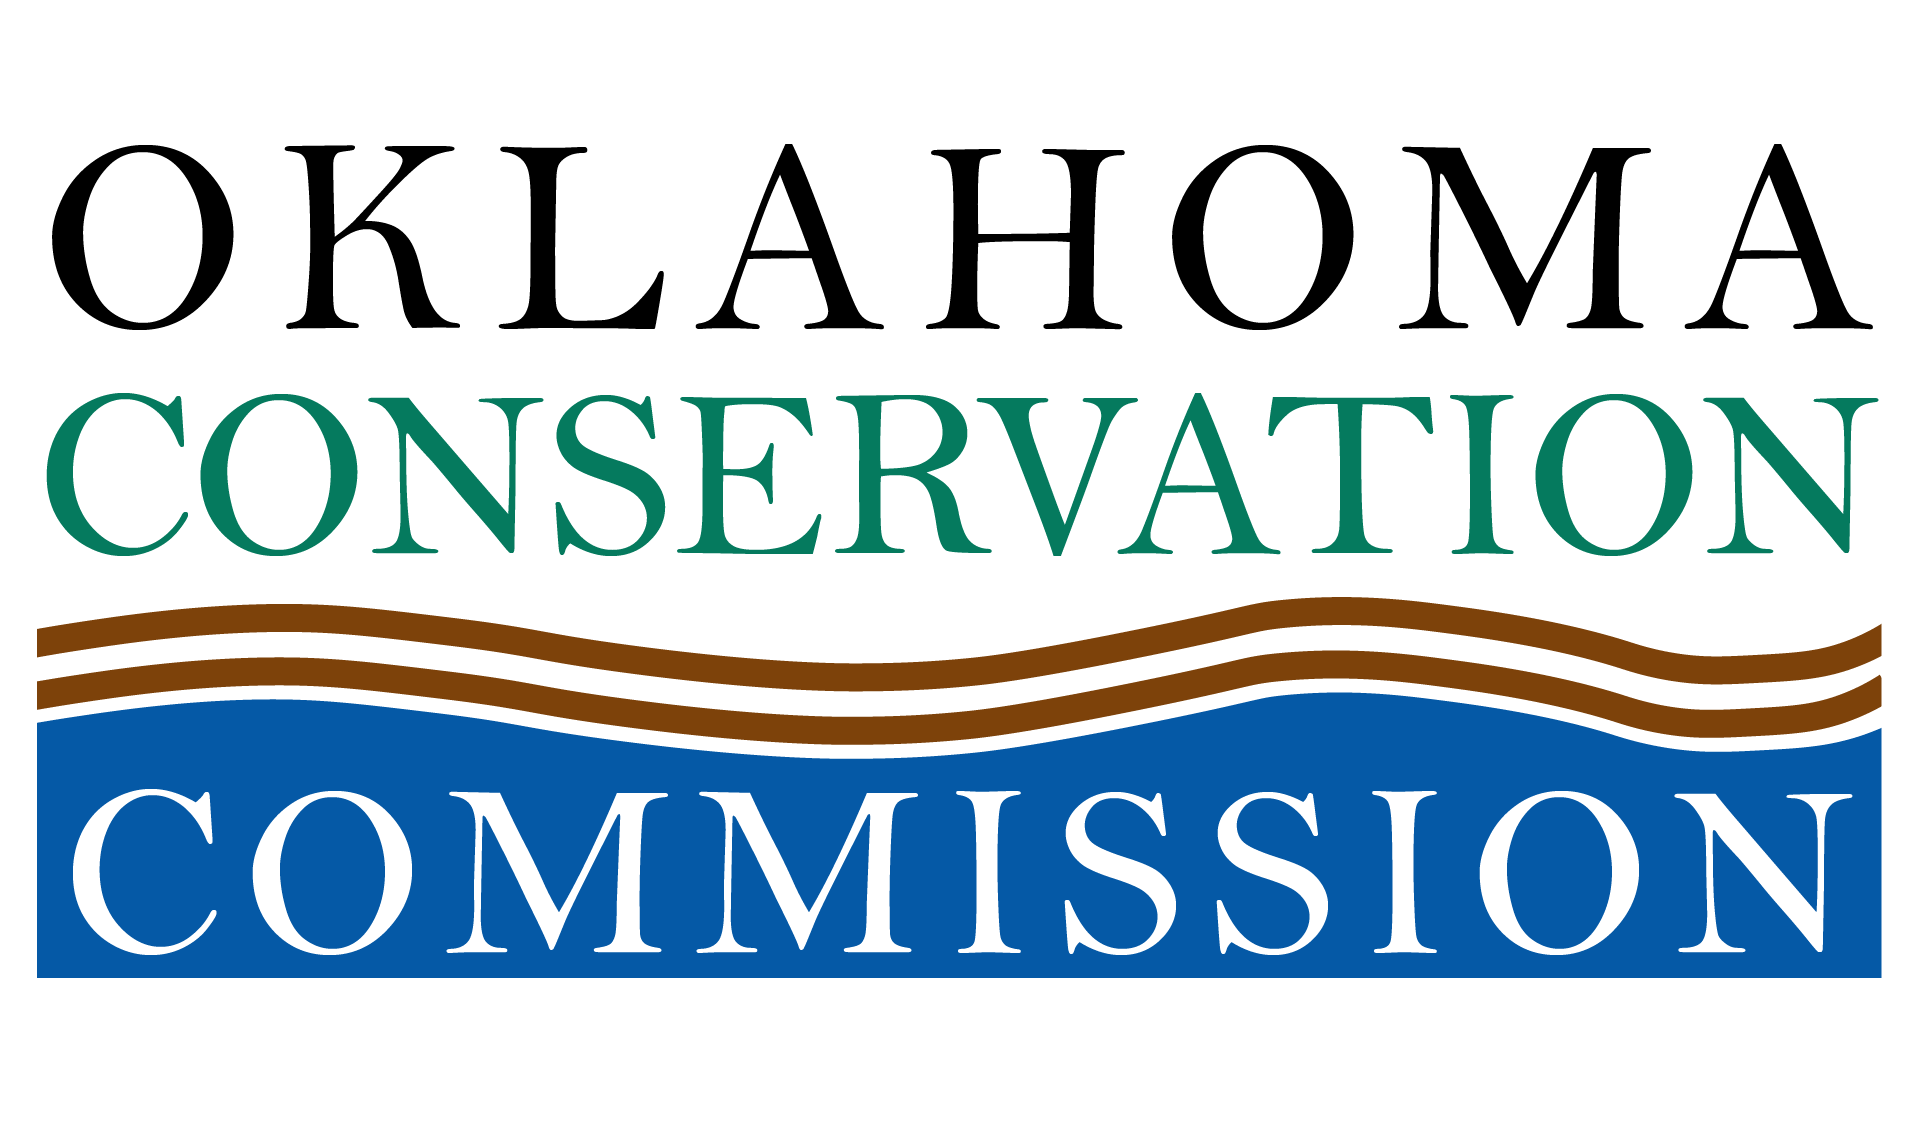 Oklahoma Conservation Commission